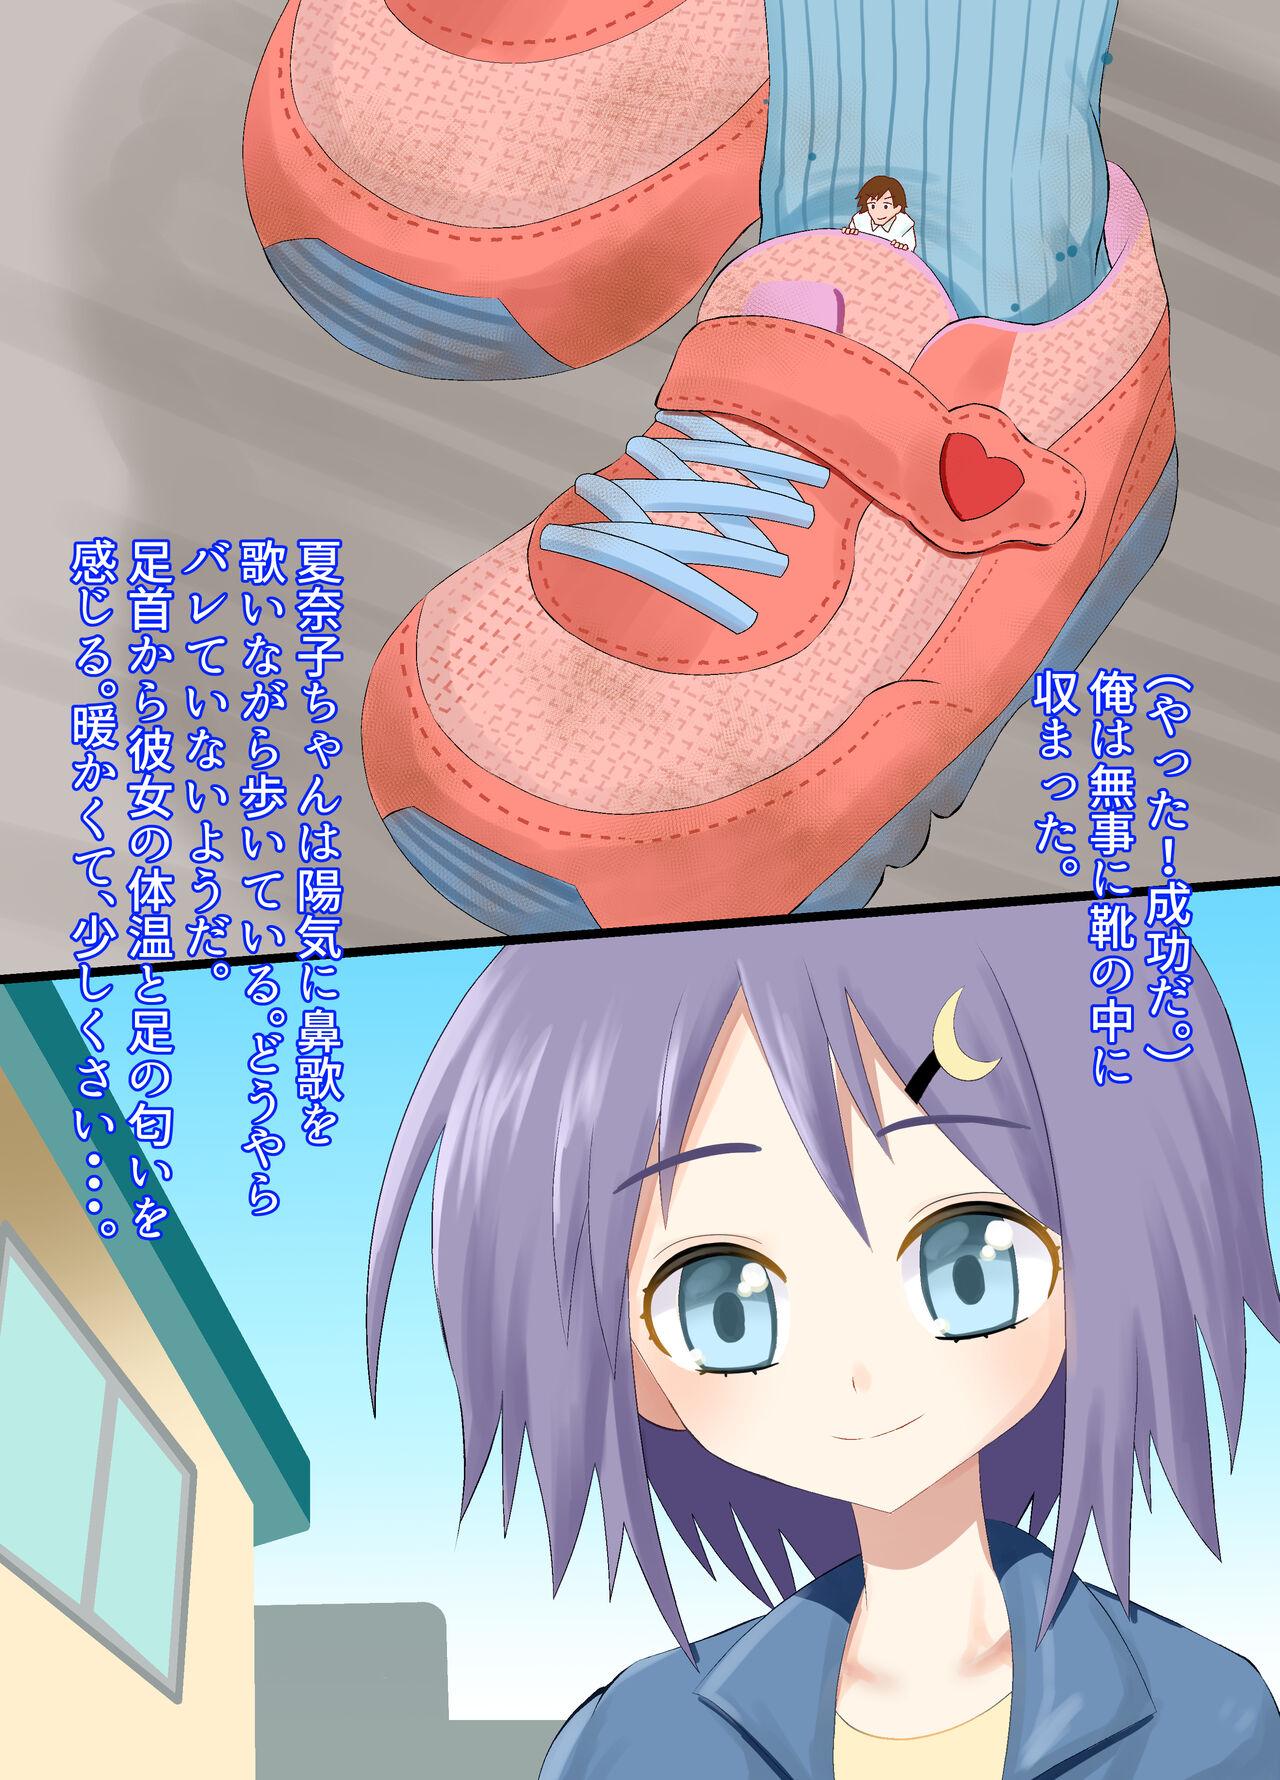 A CG collection of getting smaller and being stepped on by a girl 7